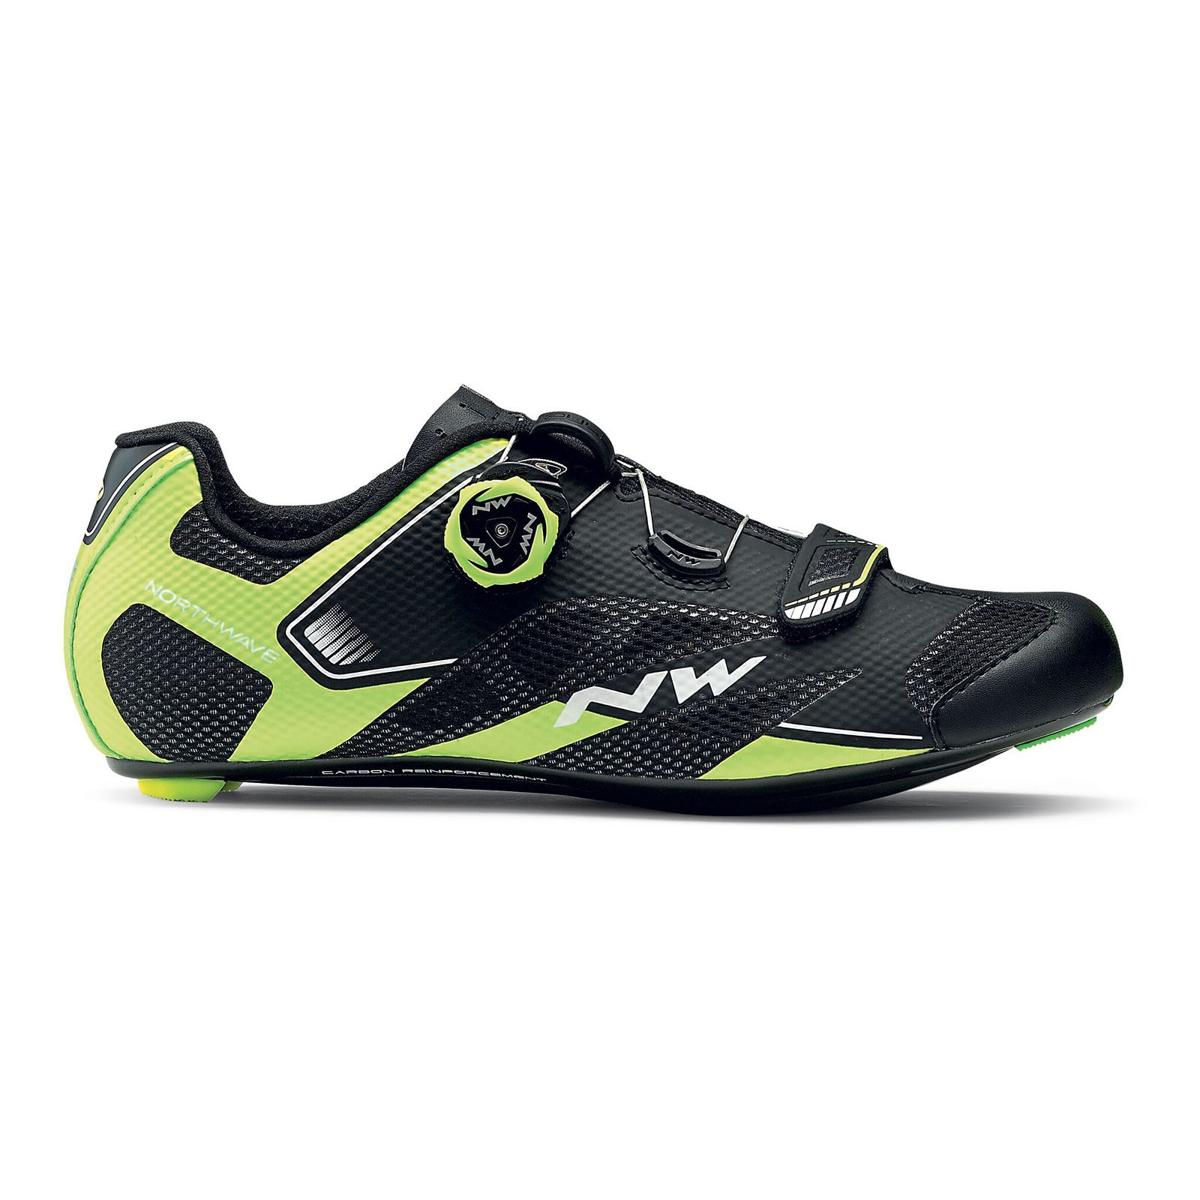 Northwave Sonic 2 Plus Road Cycling Shoes